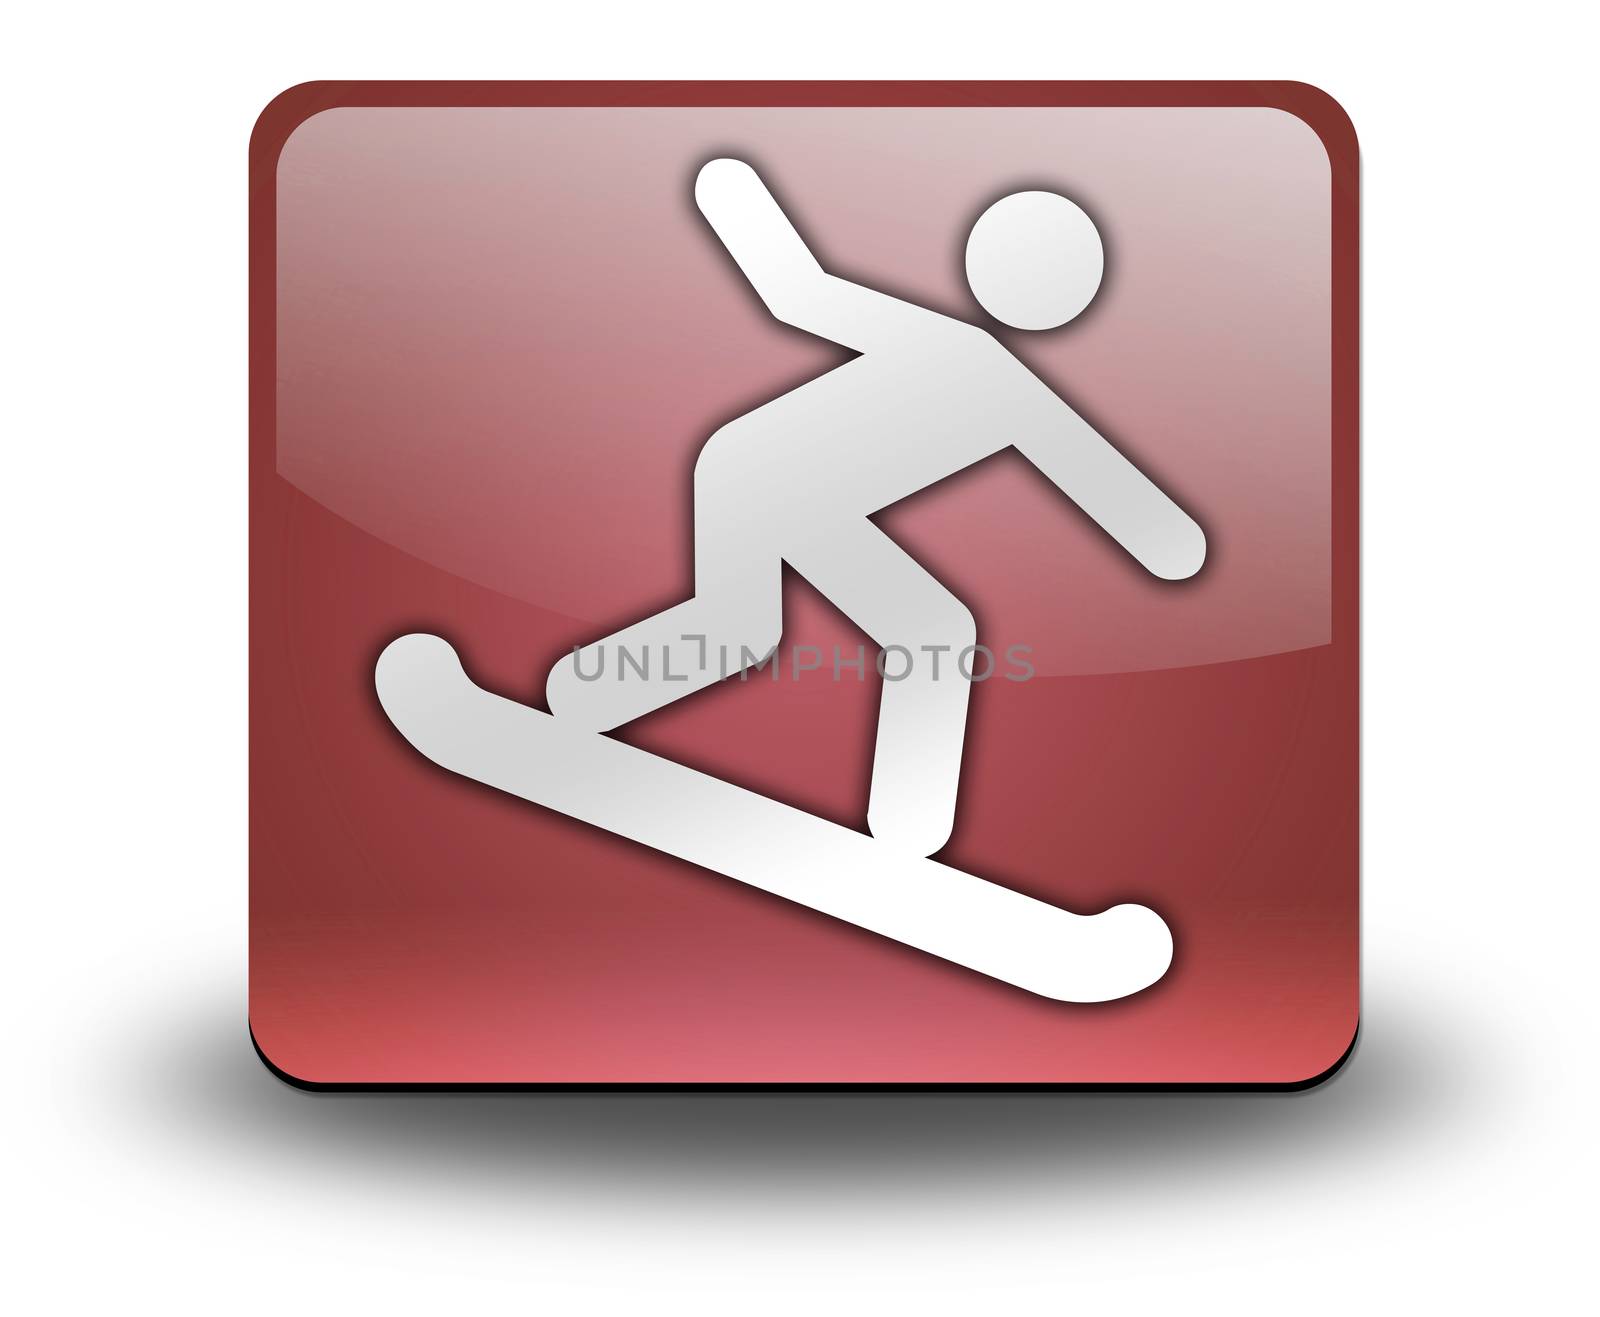 Icon, Button, Pictogram Snowboarding by mindscanner